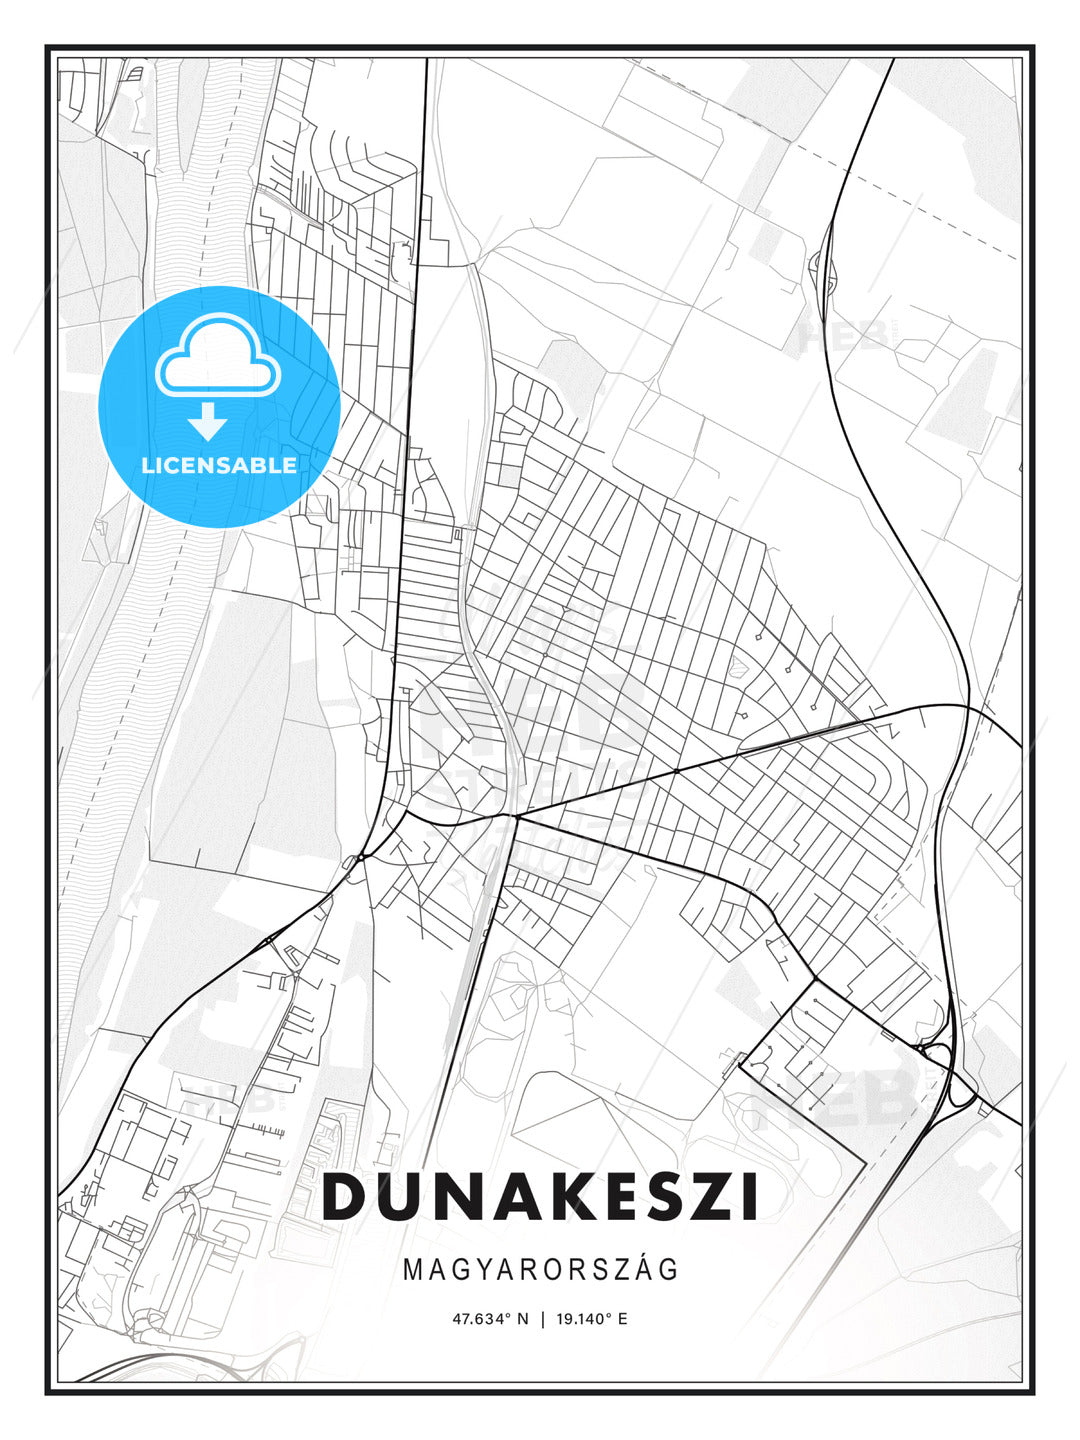 Dunakeszi, Hungary, Modern Print Template in Various Formats - HEBSTREITS Sketches